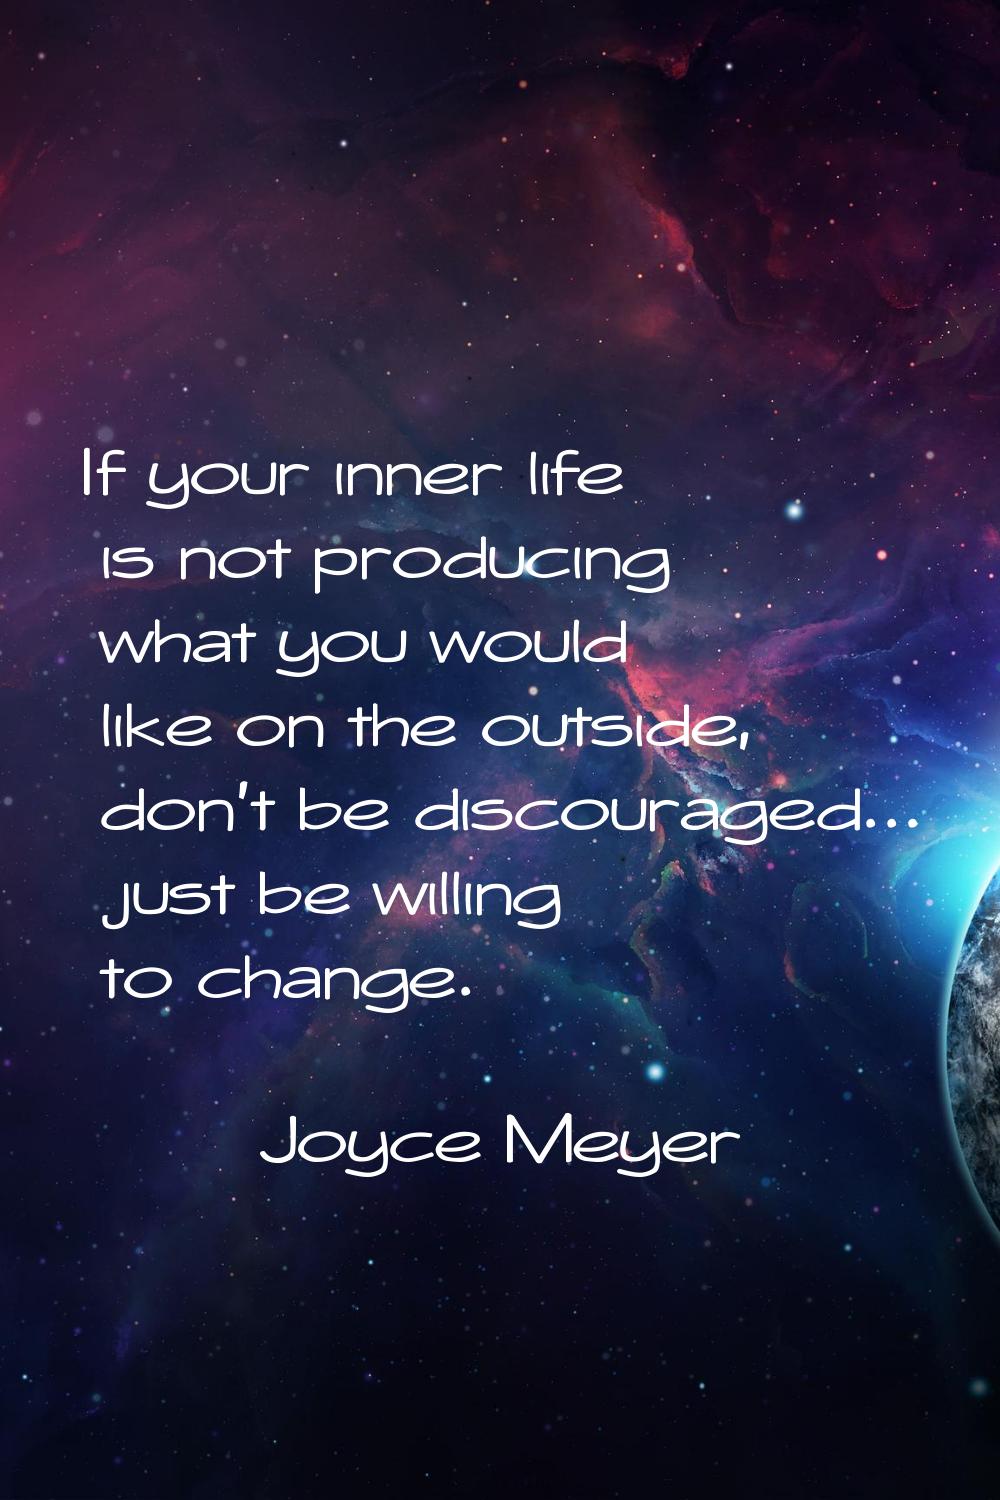 If your inner life is not producing what you would like on the outside, don't be discouraged... jus